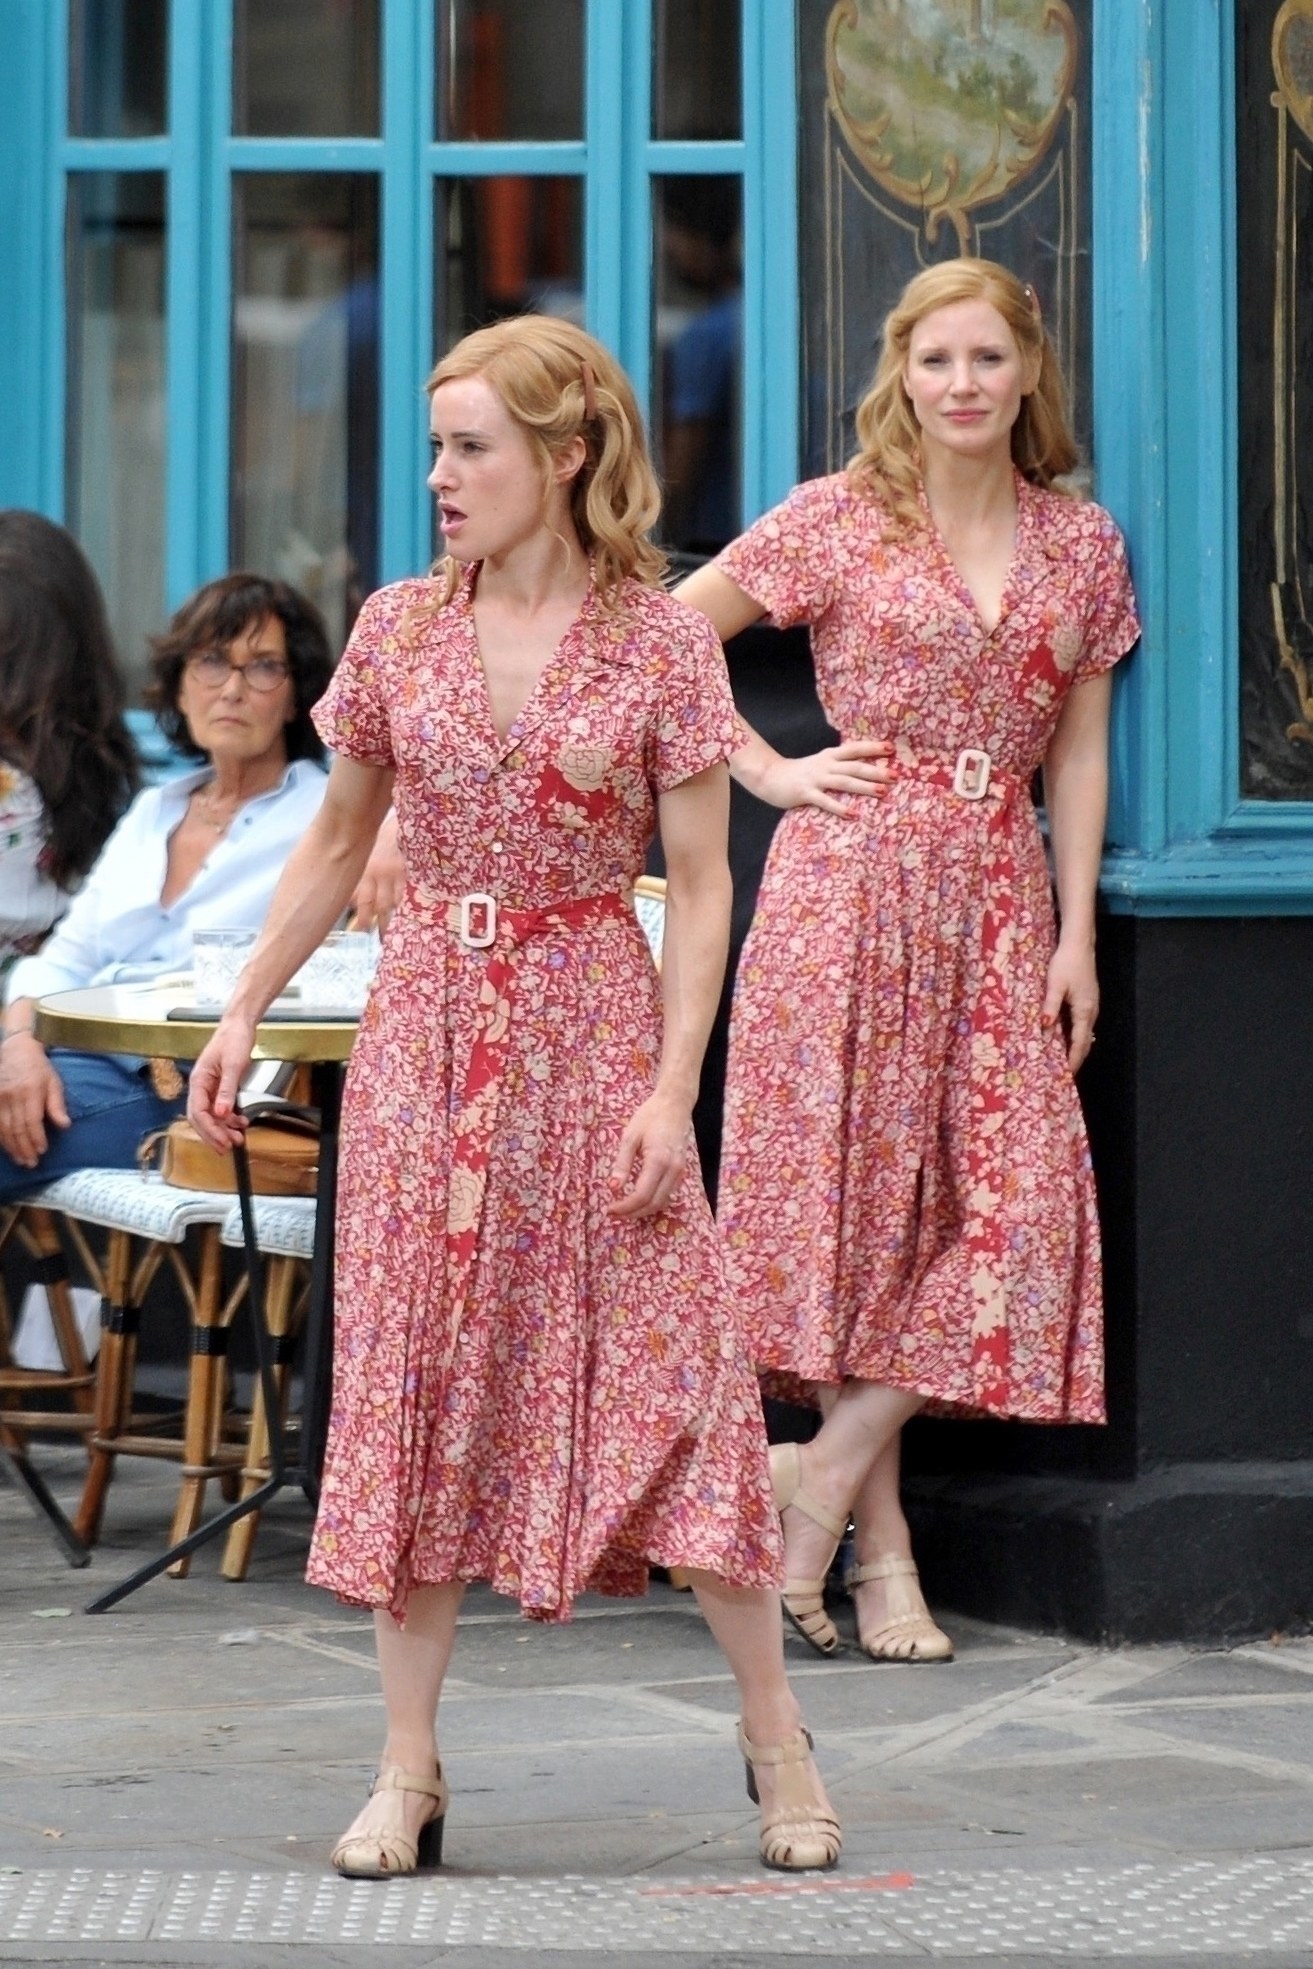 35 Actors And Their Stunt Doubles Jessica Chastain